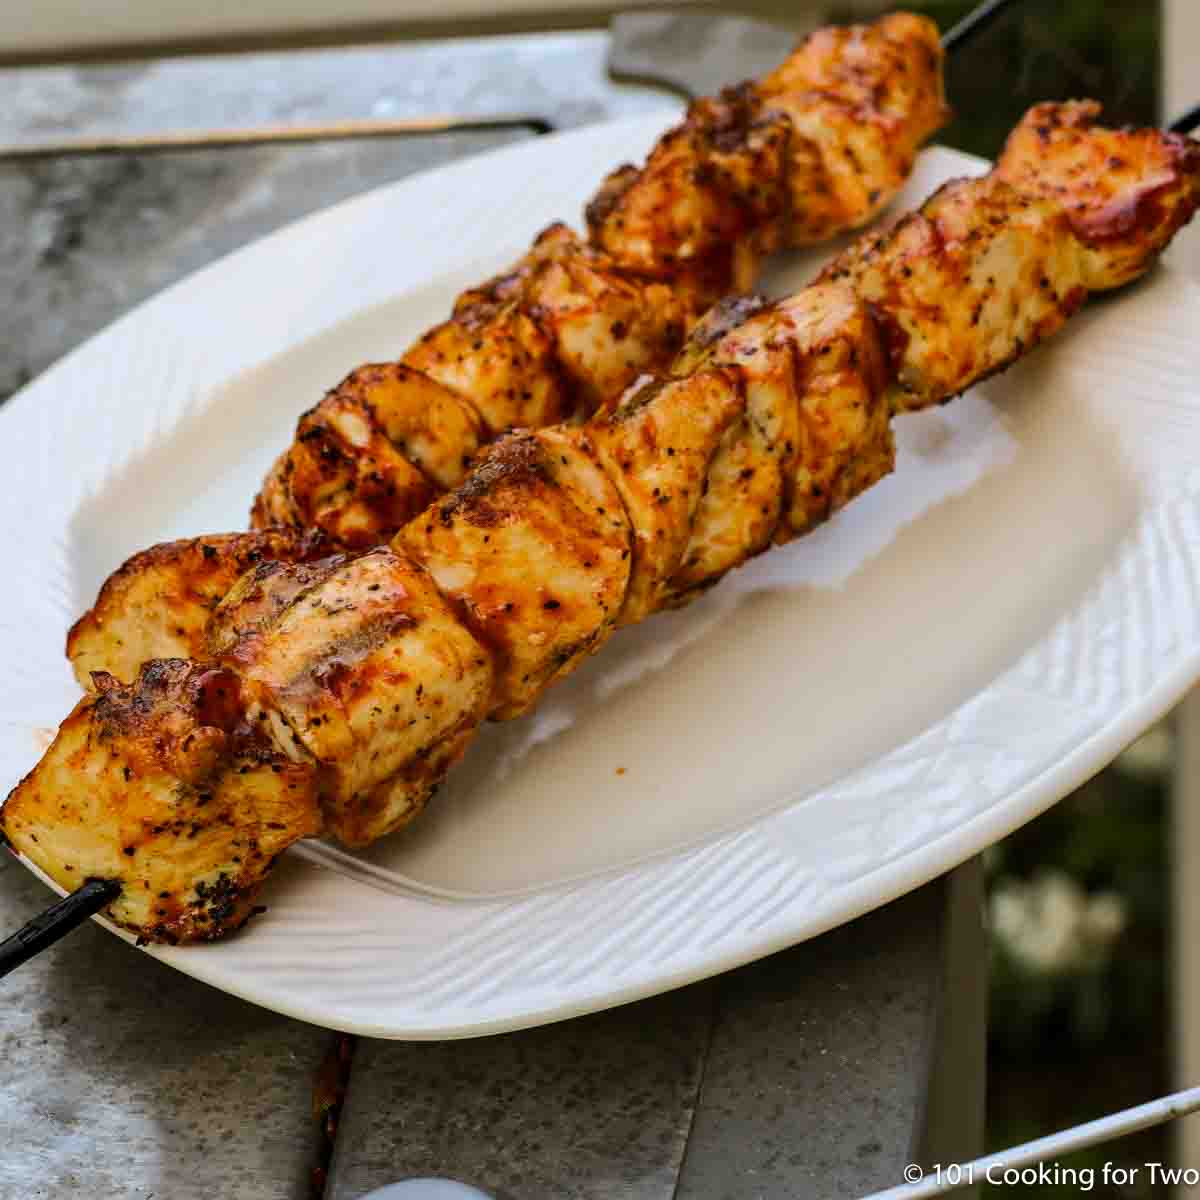 The 4 Best Skewers of 2023, Tested & Reviewed